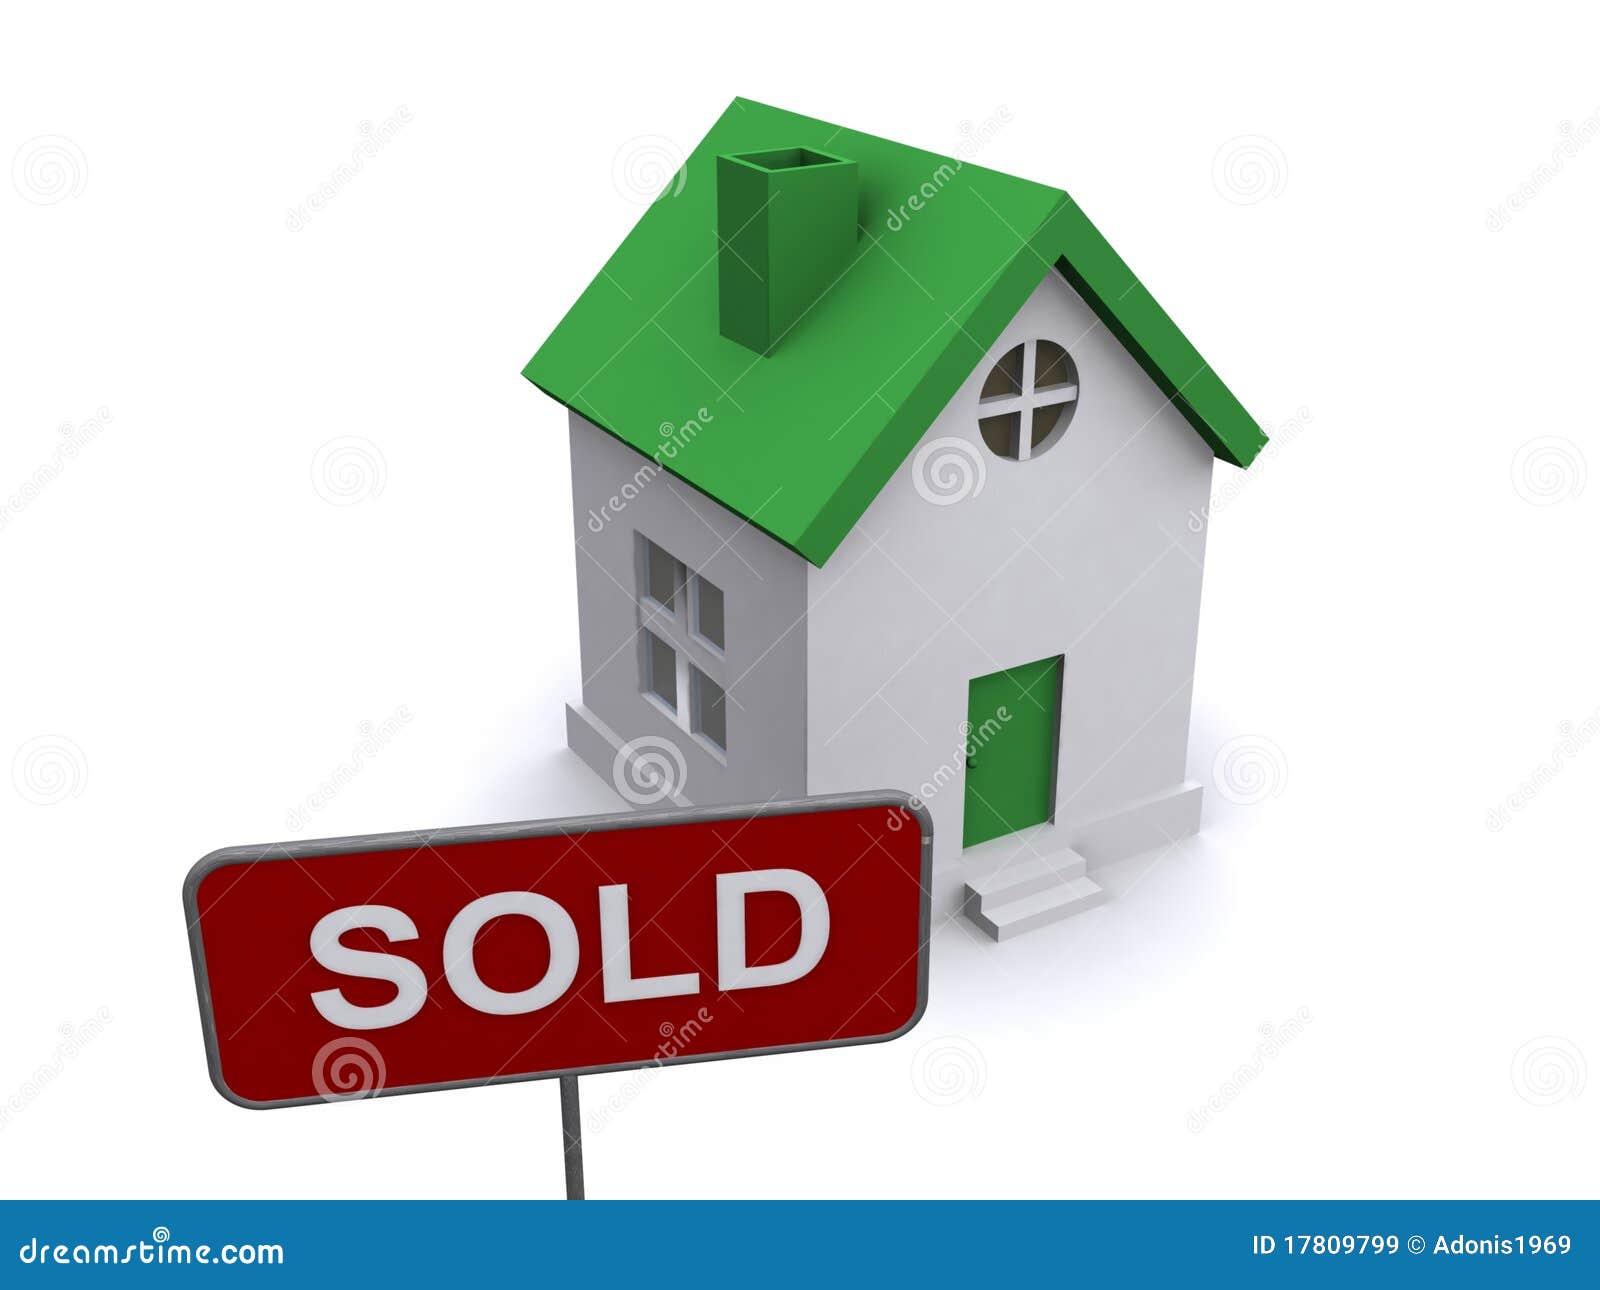 free clipart house sold - photo #49